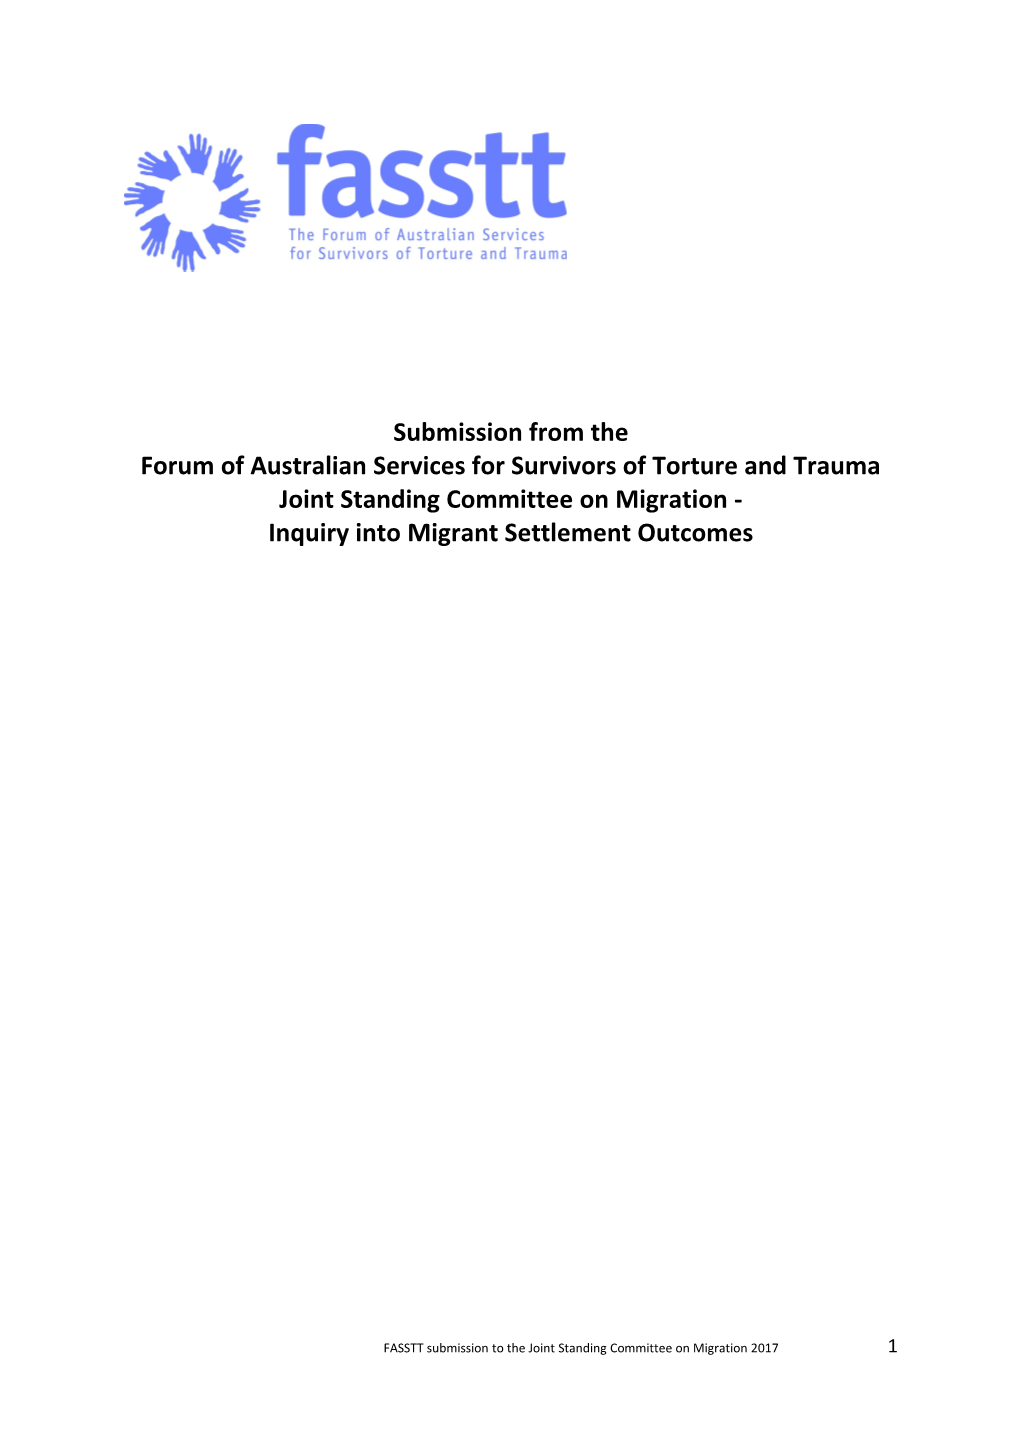 Forum of Australian Services for Survivors of Torture and Trauma